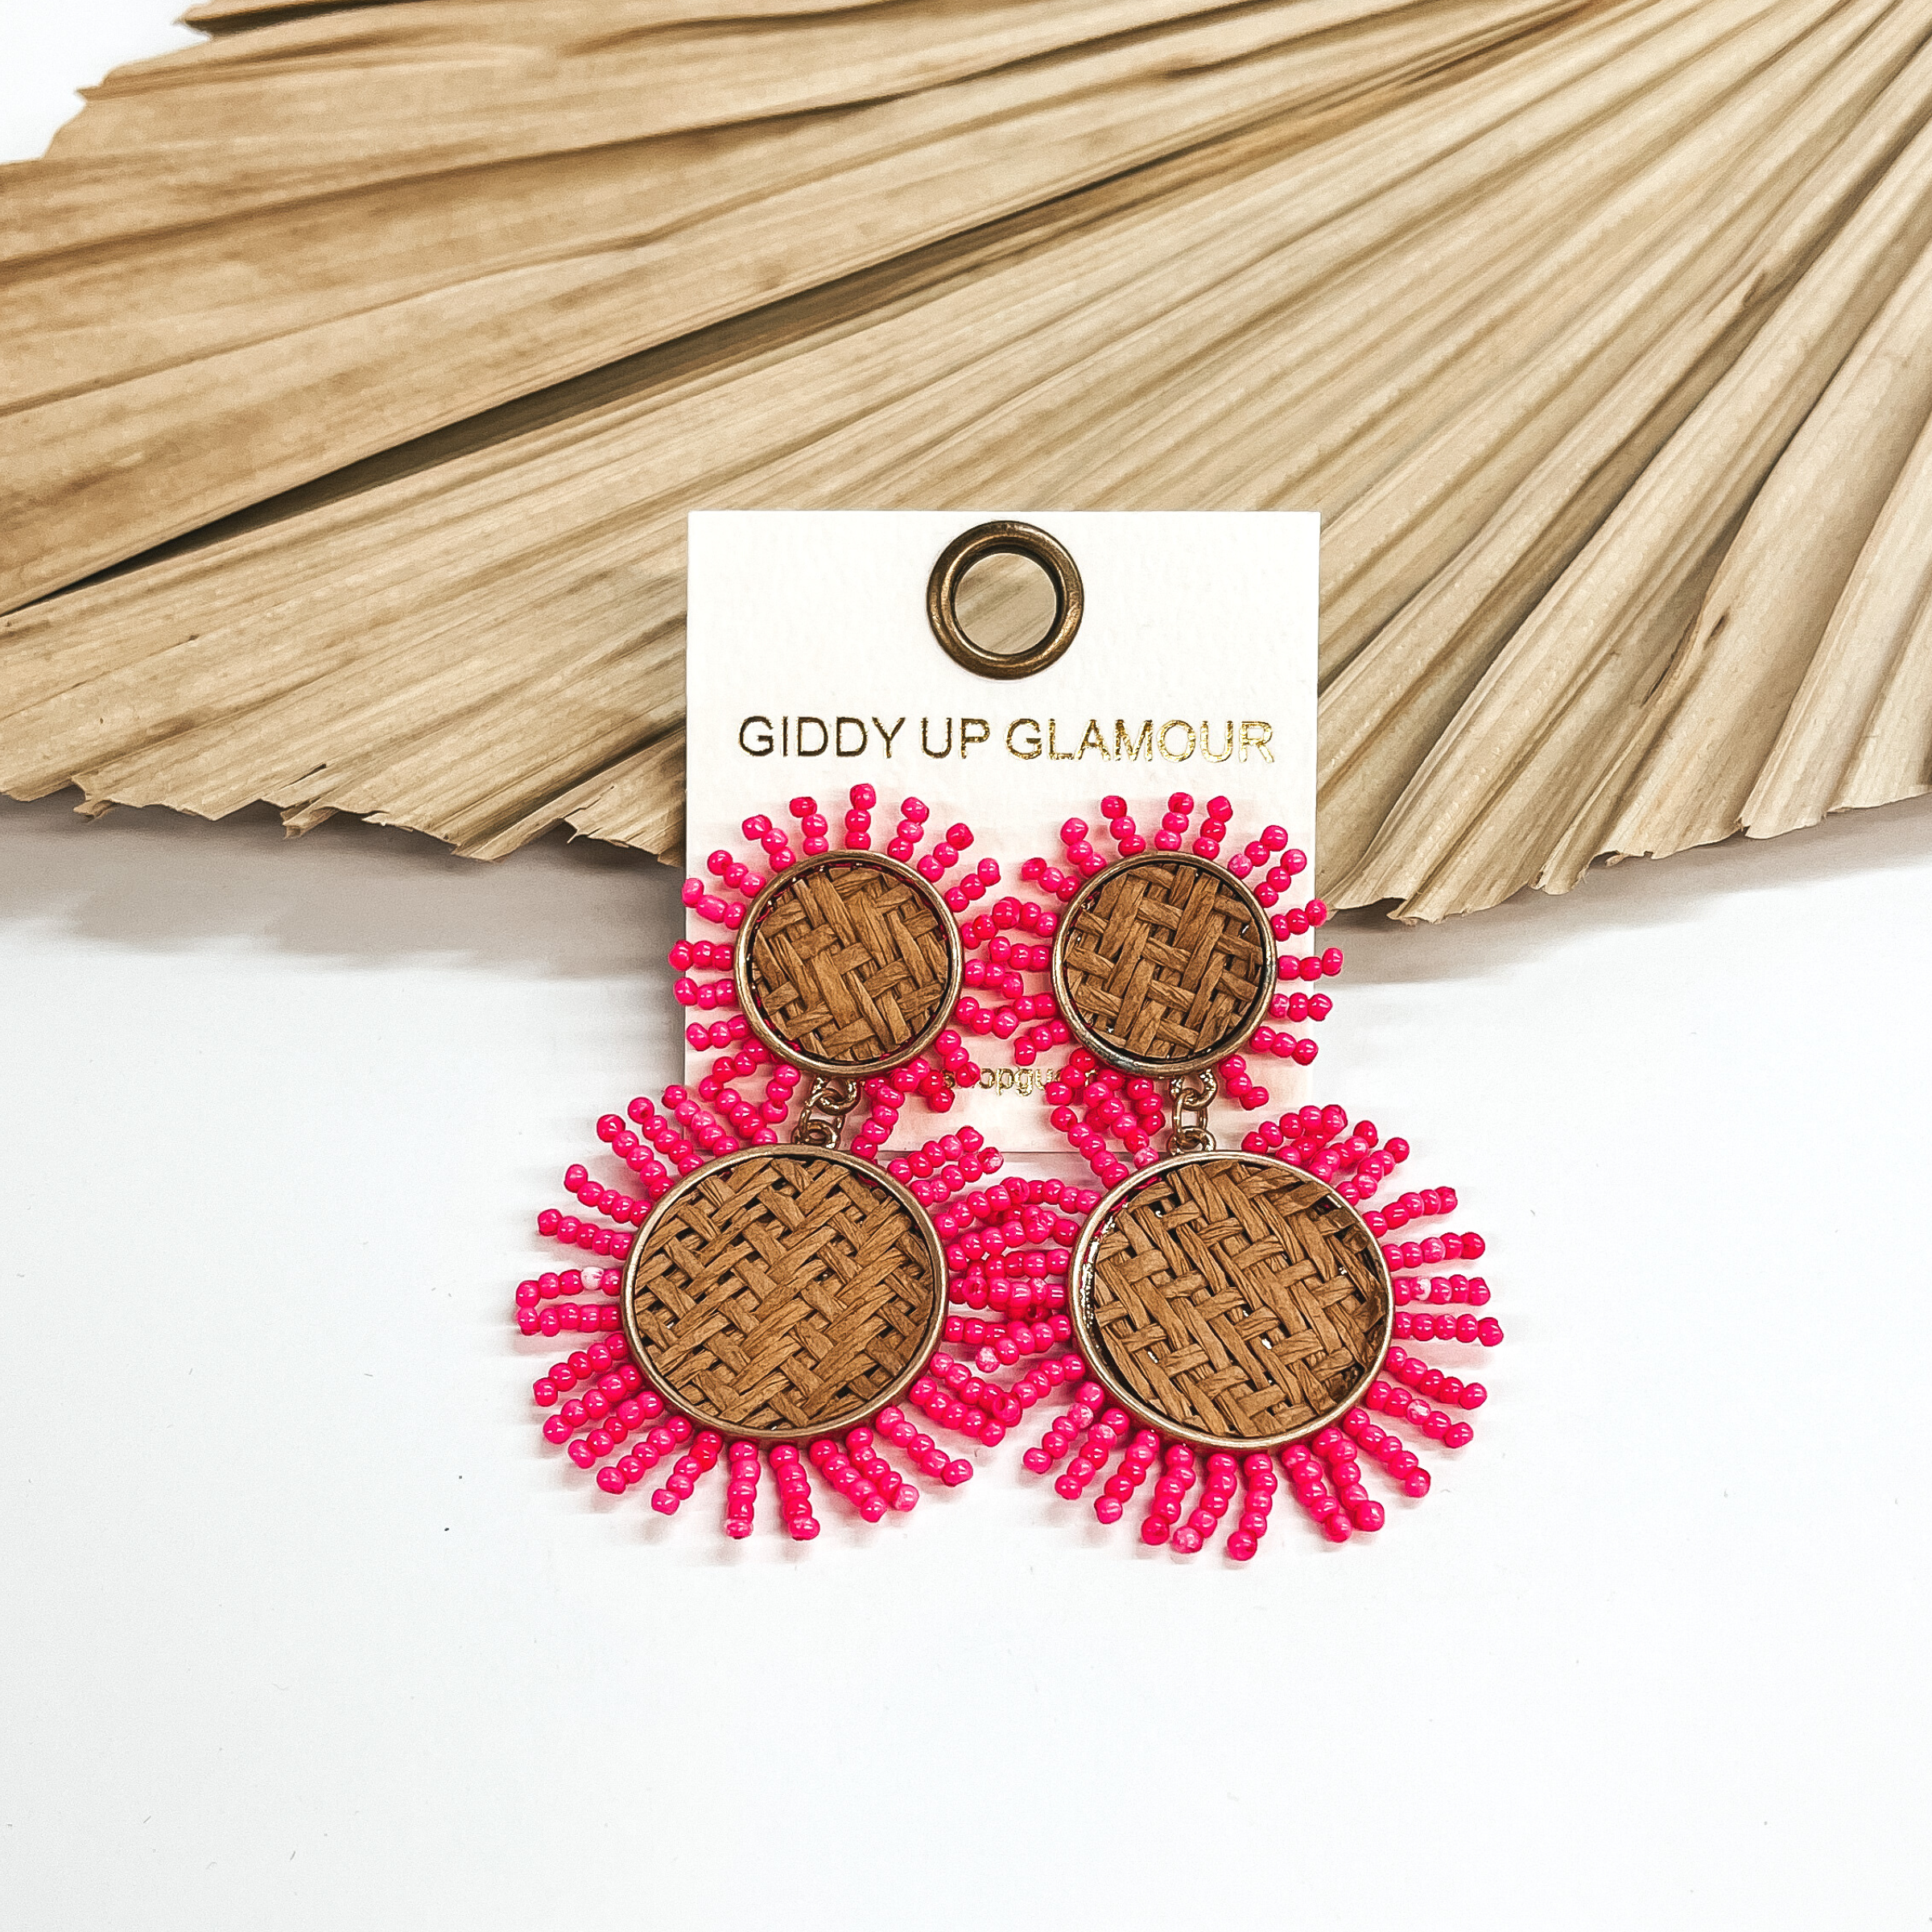 These earrings are two tiered woven earrings in a  gold setting with pink seed beads all around. These  earrings are taken on a white background and leaned  up against a dried up palm leaf.